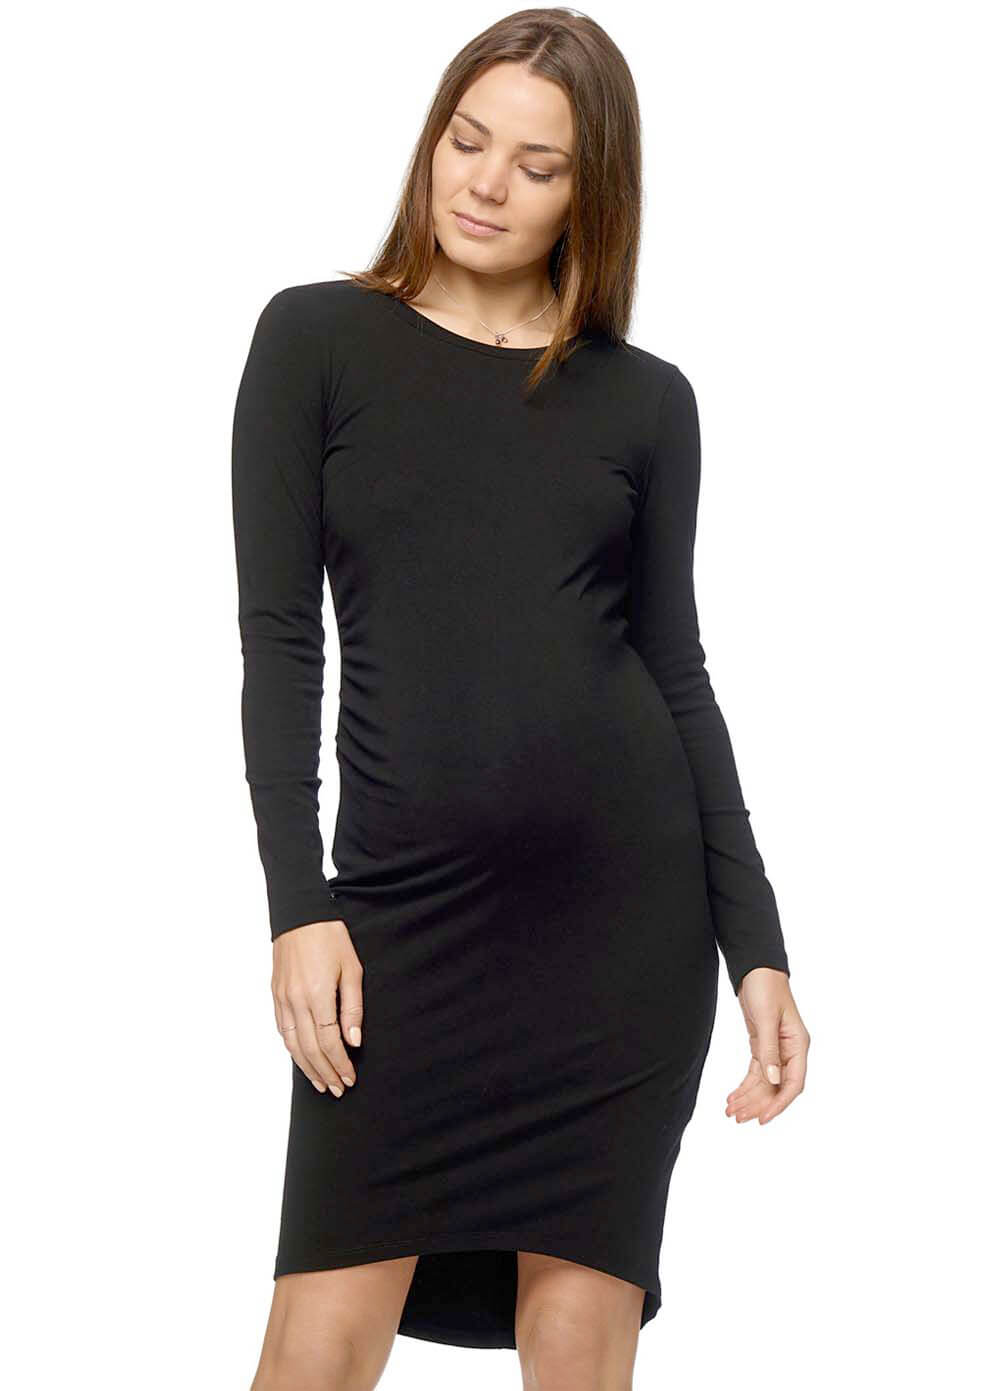 L/S Shadow Sounds Maternity Dress in Black by Bae The Label